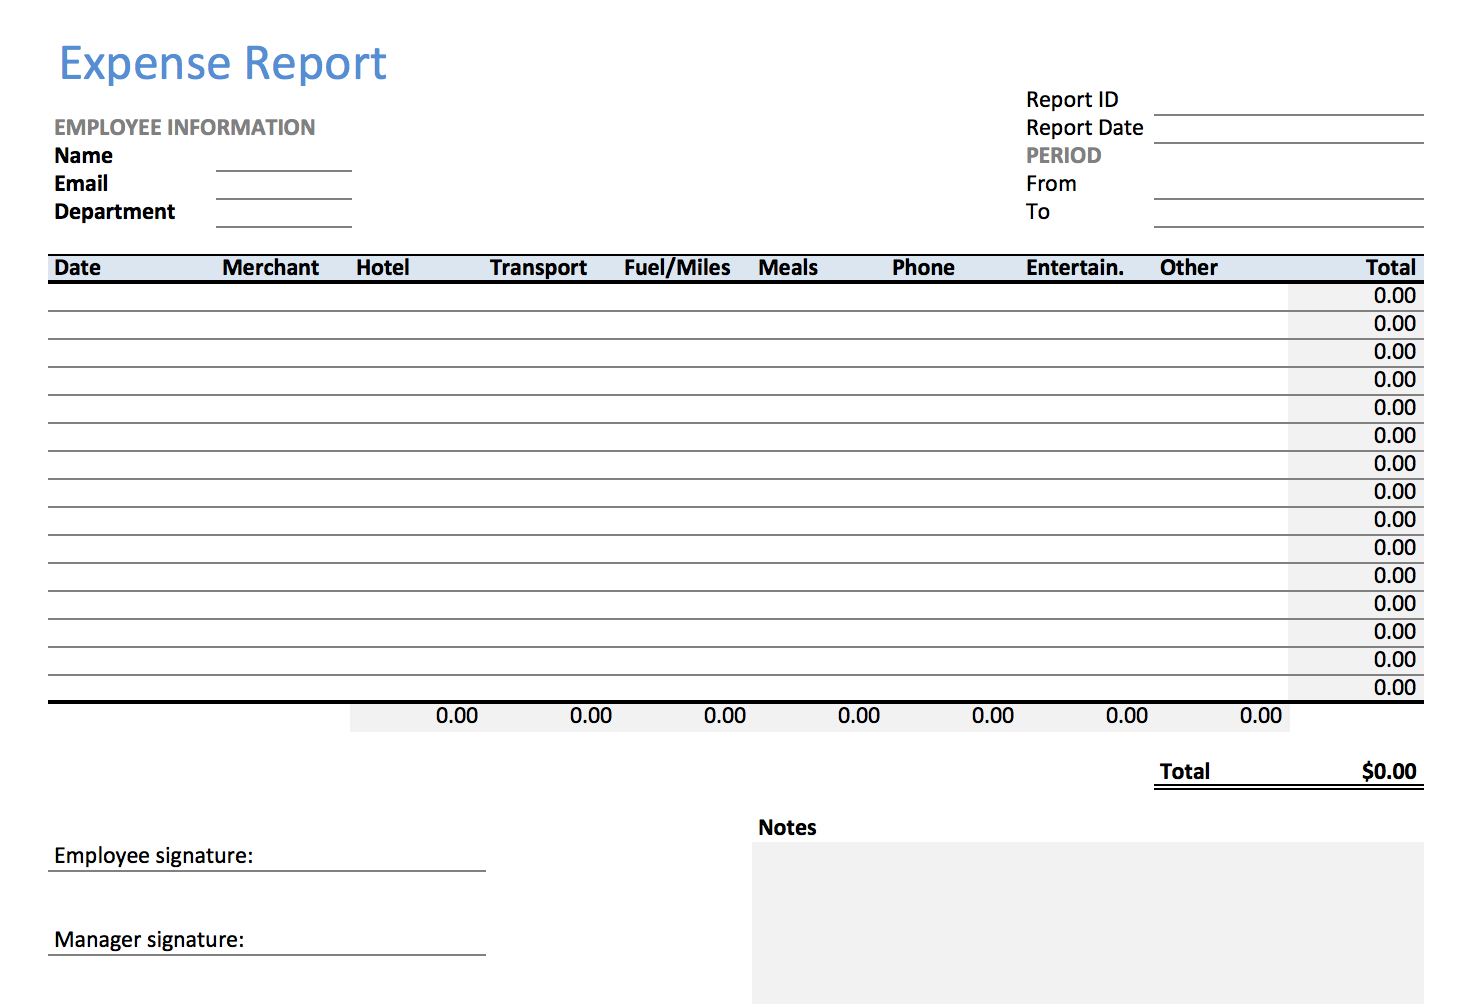 How To Create A Simple Expense Report In Excel